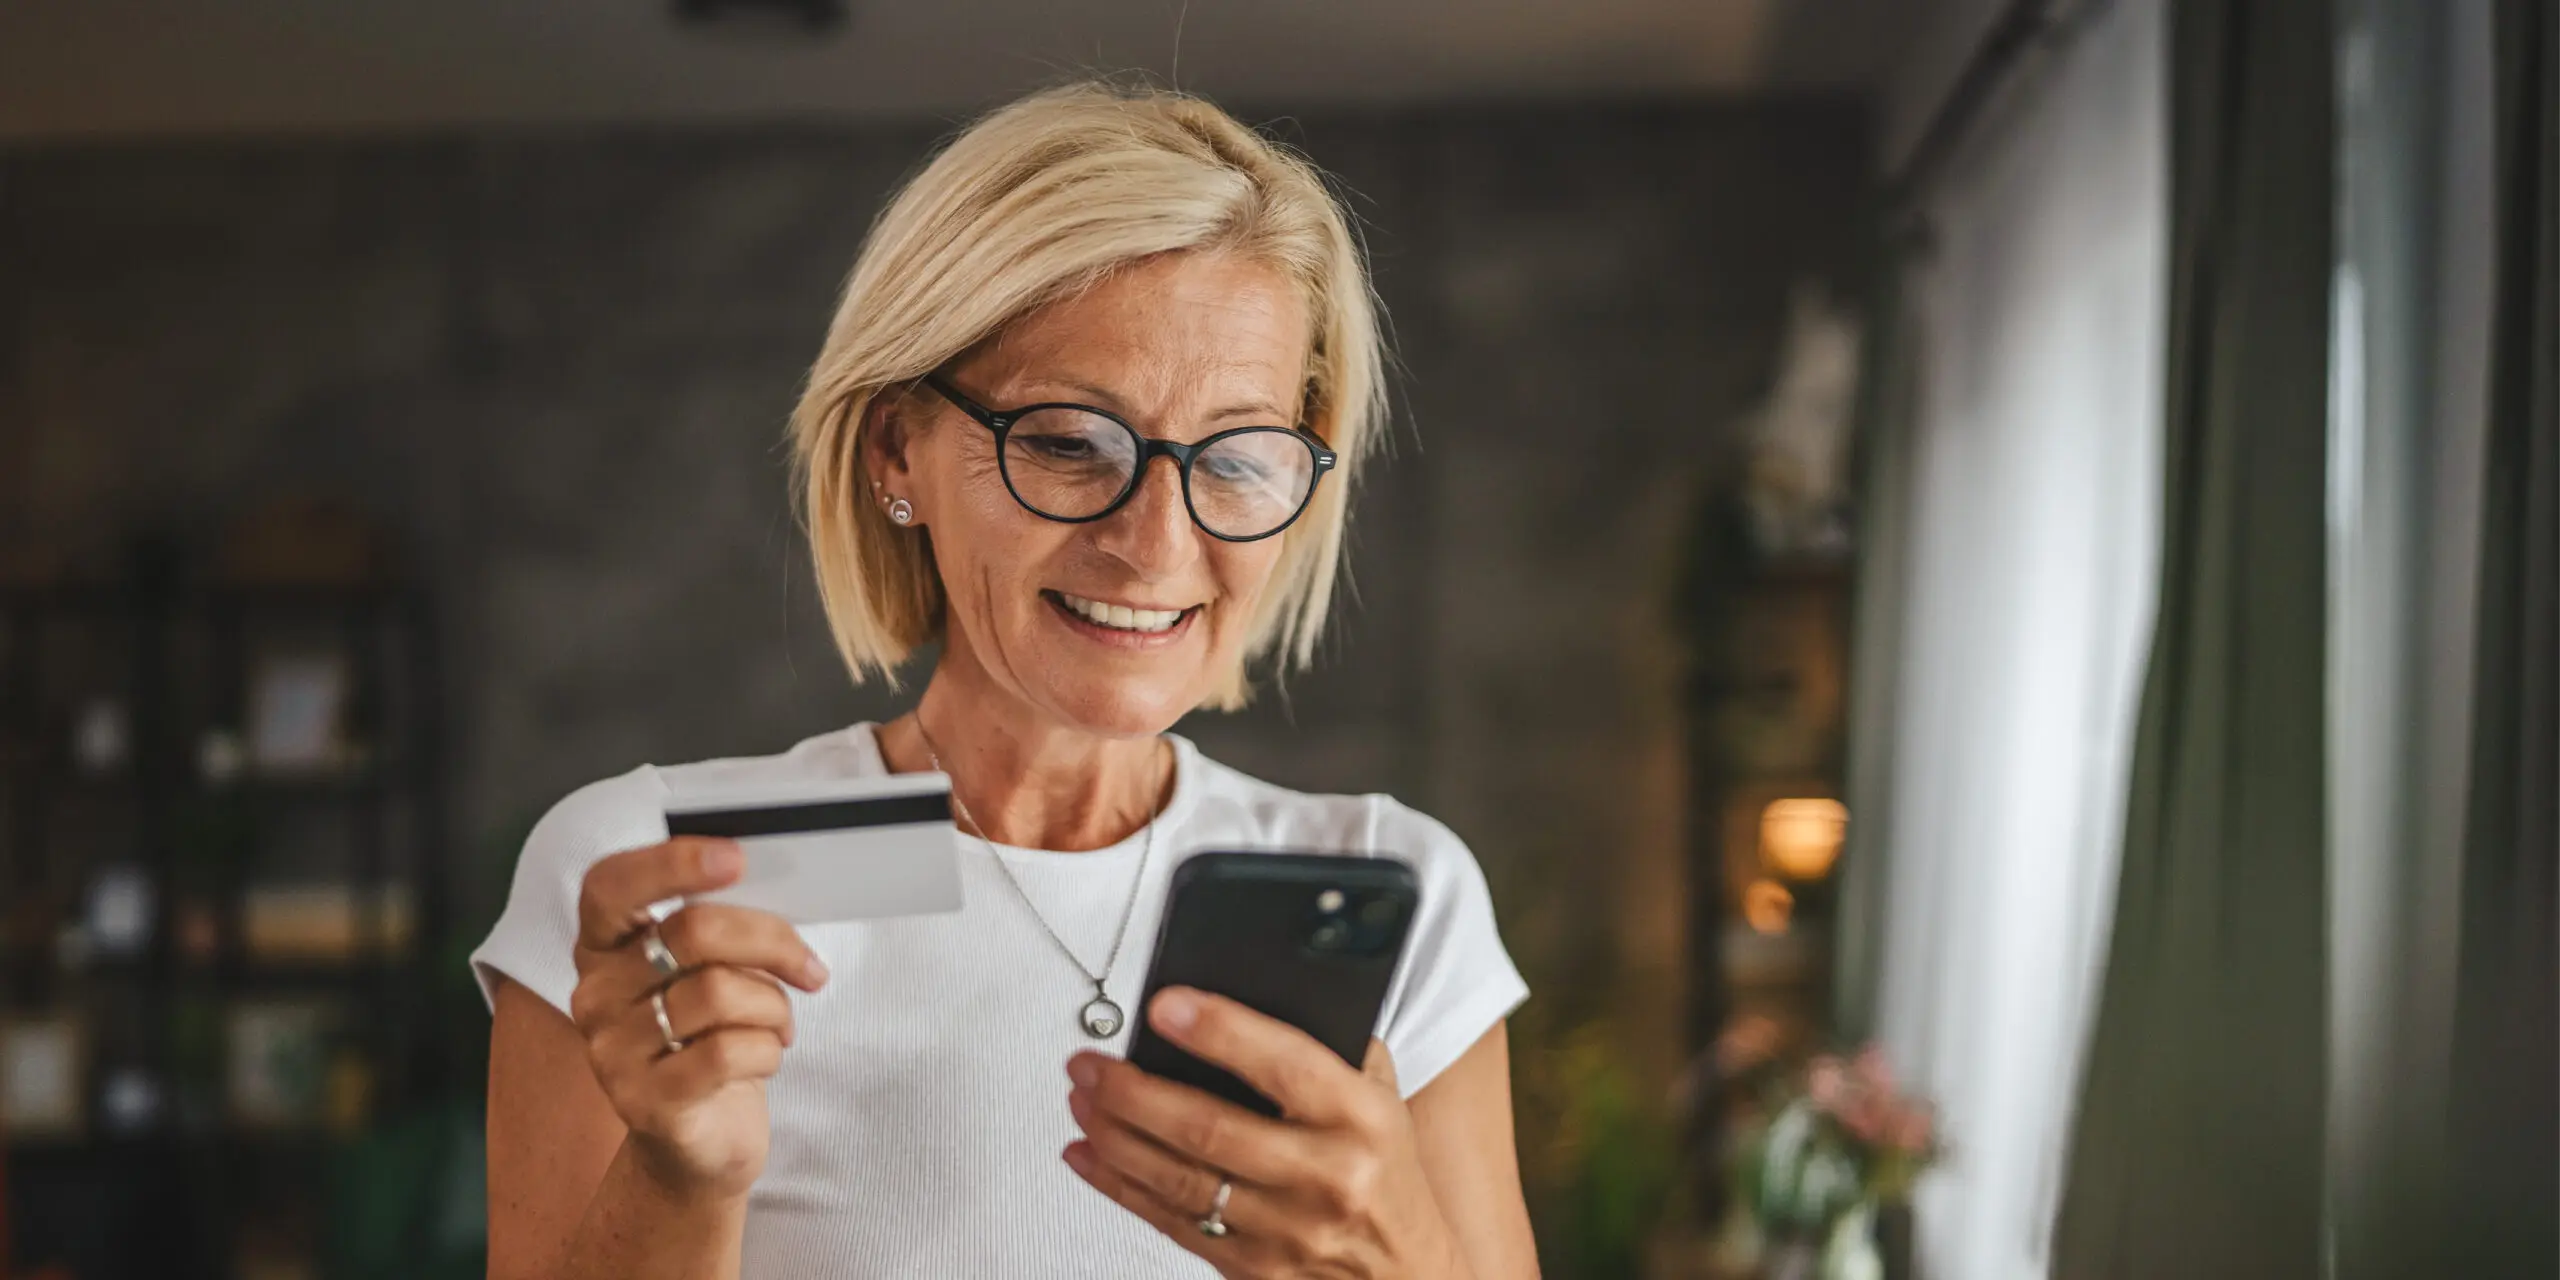 Portrait of a Smiling Woman Standing and Buying Items Online Using Cellphone With Credit Card